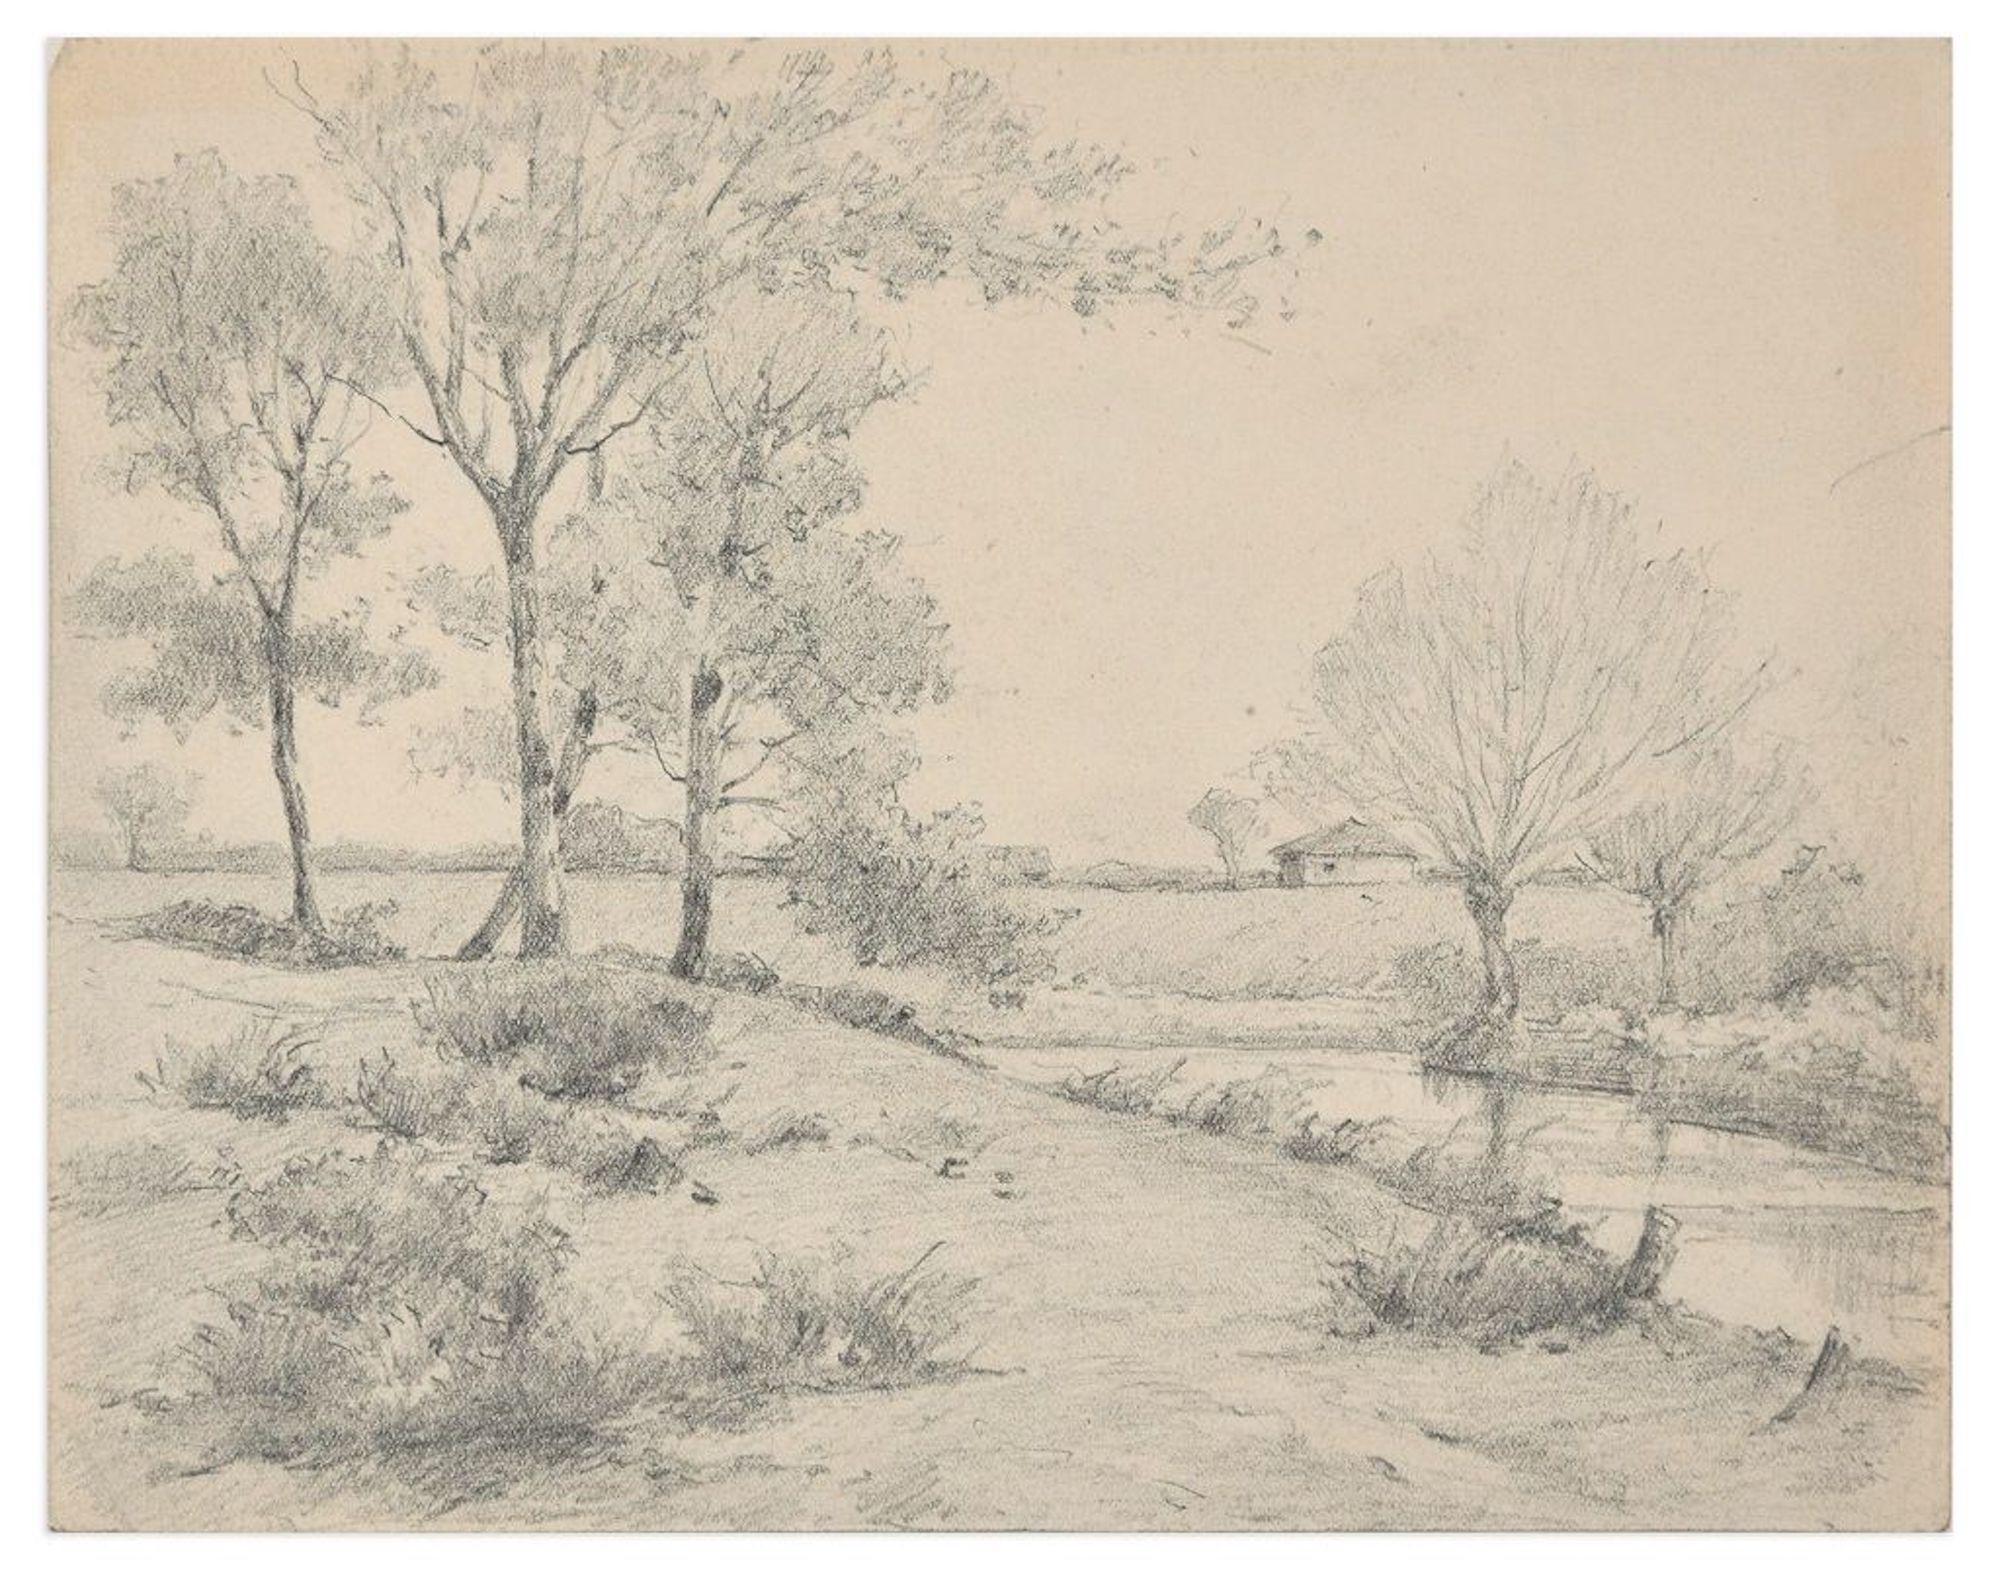 Emile-Louis Minet Landscape Art – Countryside with Trees and River - Charcoal by E.-L. Minet - Early 1900